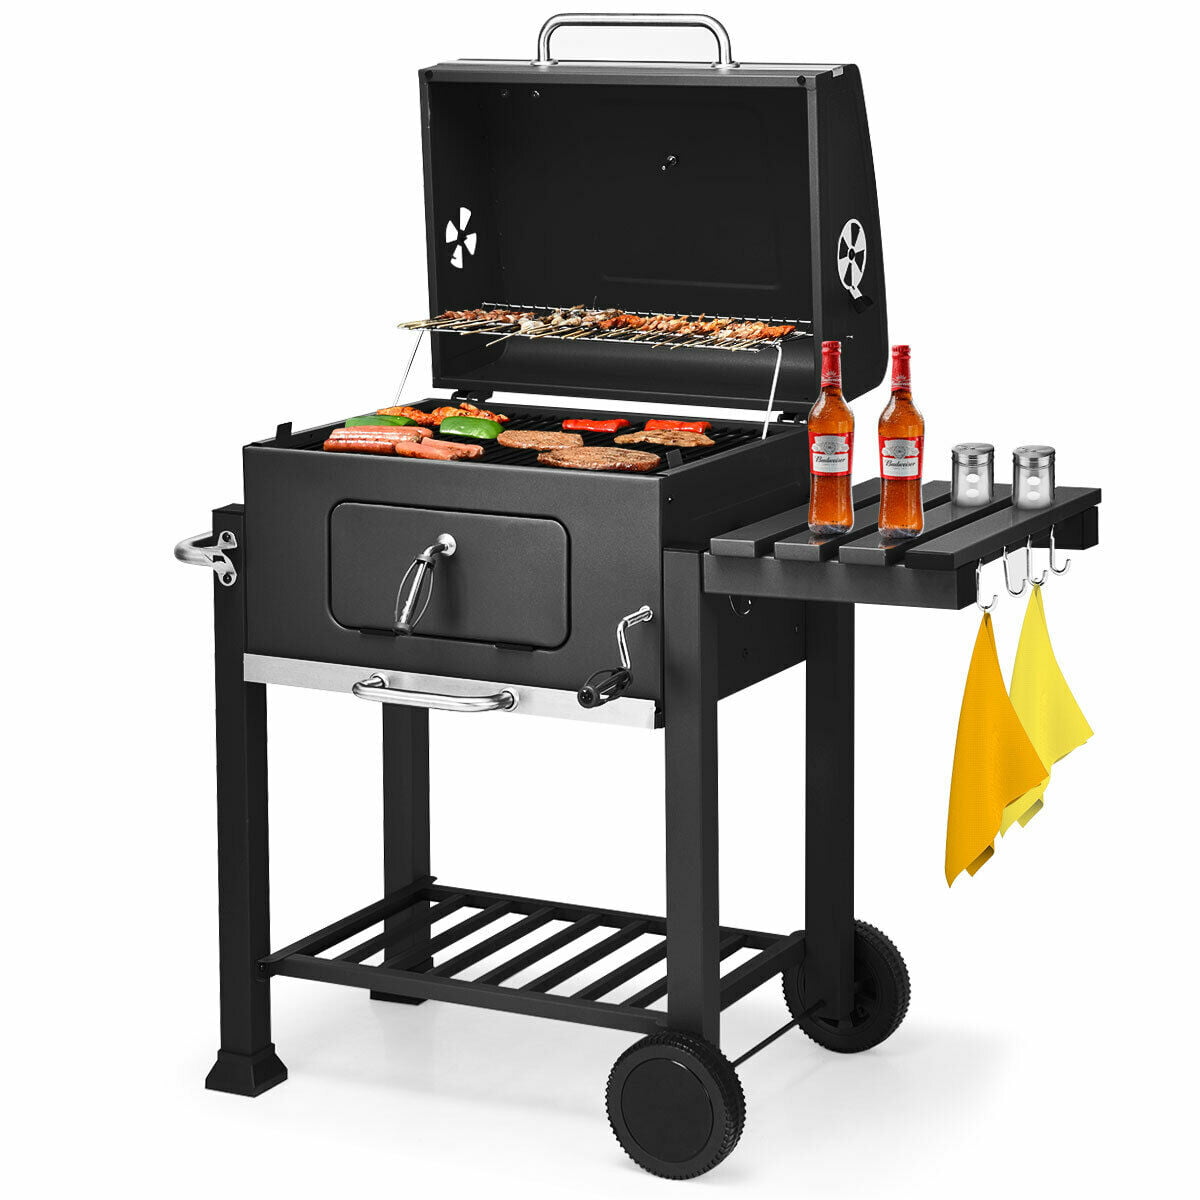 Costway Charcoal Grill Barbecue BBQ Grill Outdoor Patio ...